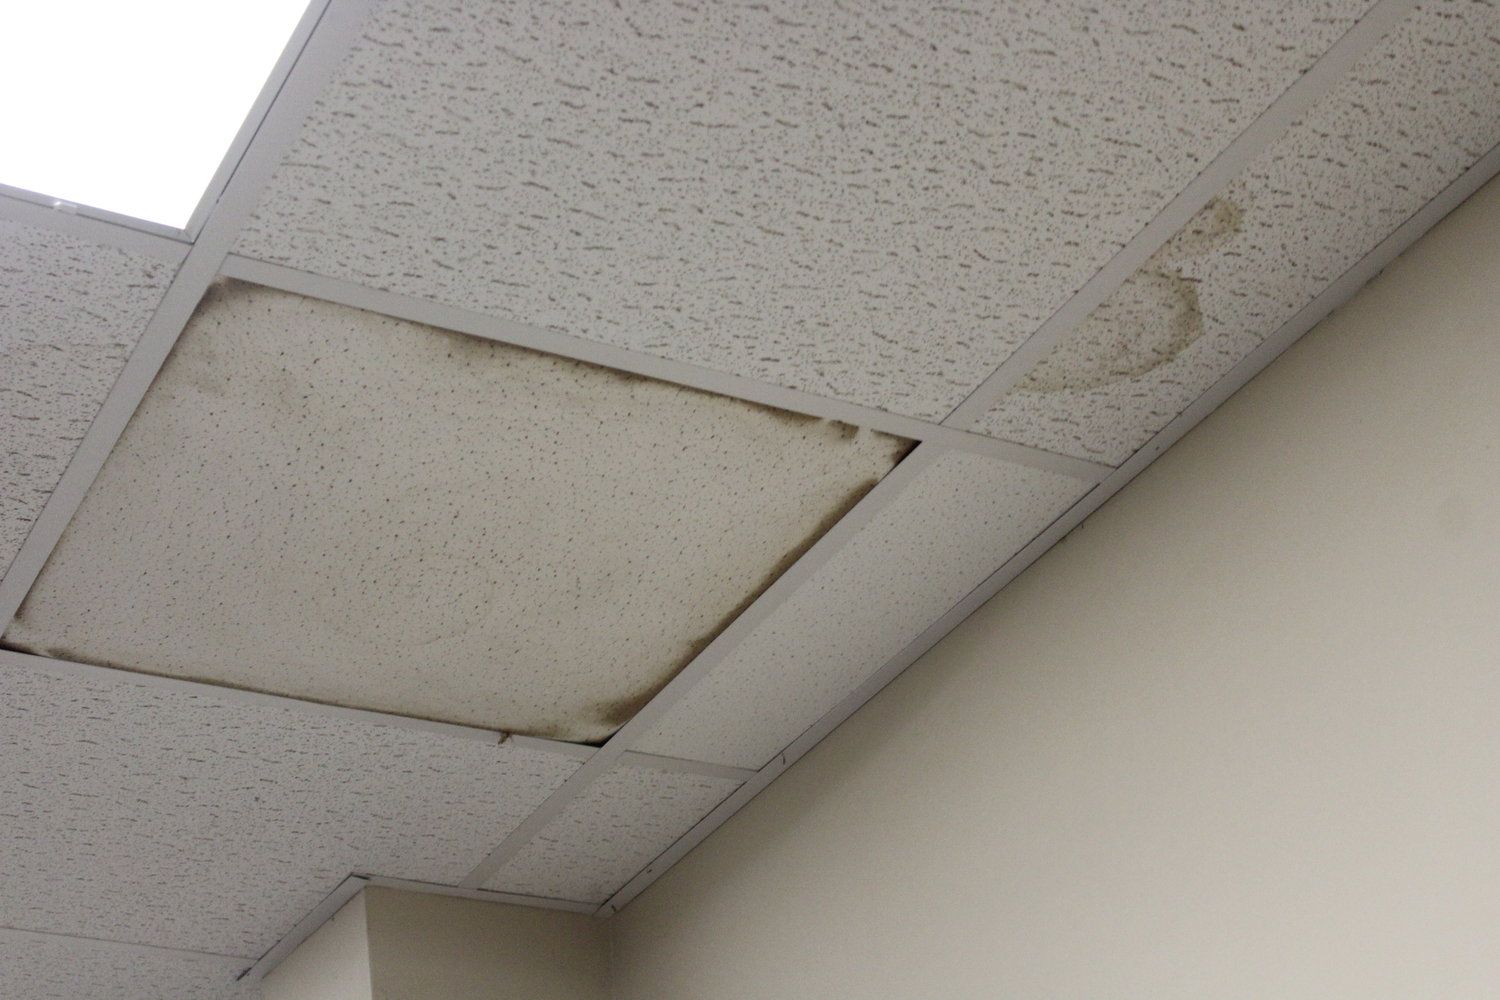 Though Victoria College maintenance staff is usually quick to replace water-stained roof tiles, some still remain. All tiles pictured above are featured in the Victoria College Workforce Training Facility, the building of interest at Gonzales city council’s meeting June 13.